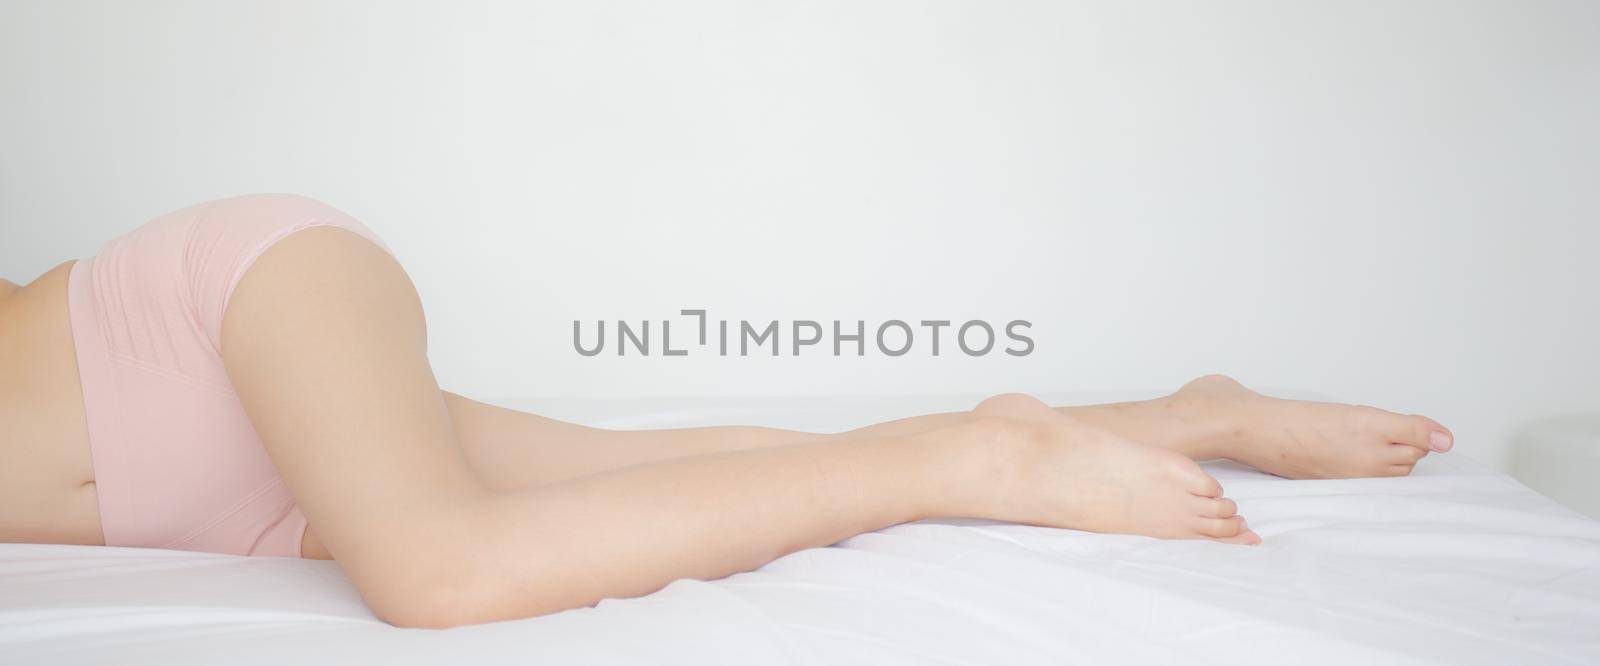 Beautiful of legs young asian woman sexy in underwear with skin smooth for health, beauty of body girl in lingerie with cellulite shape slim with diet, lifestyle and weight loss, banner website. by nnudoo